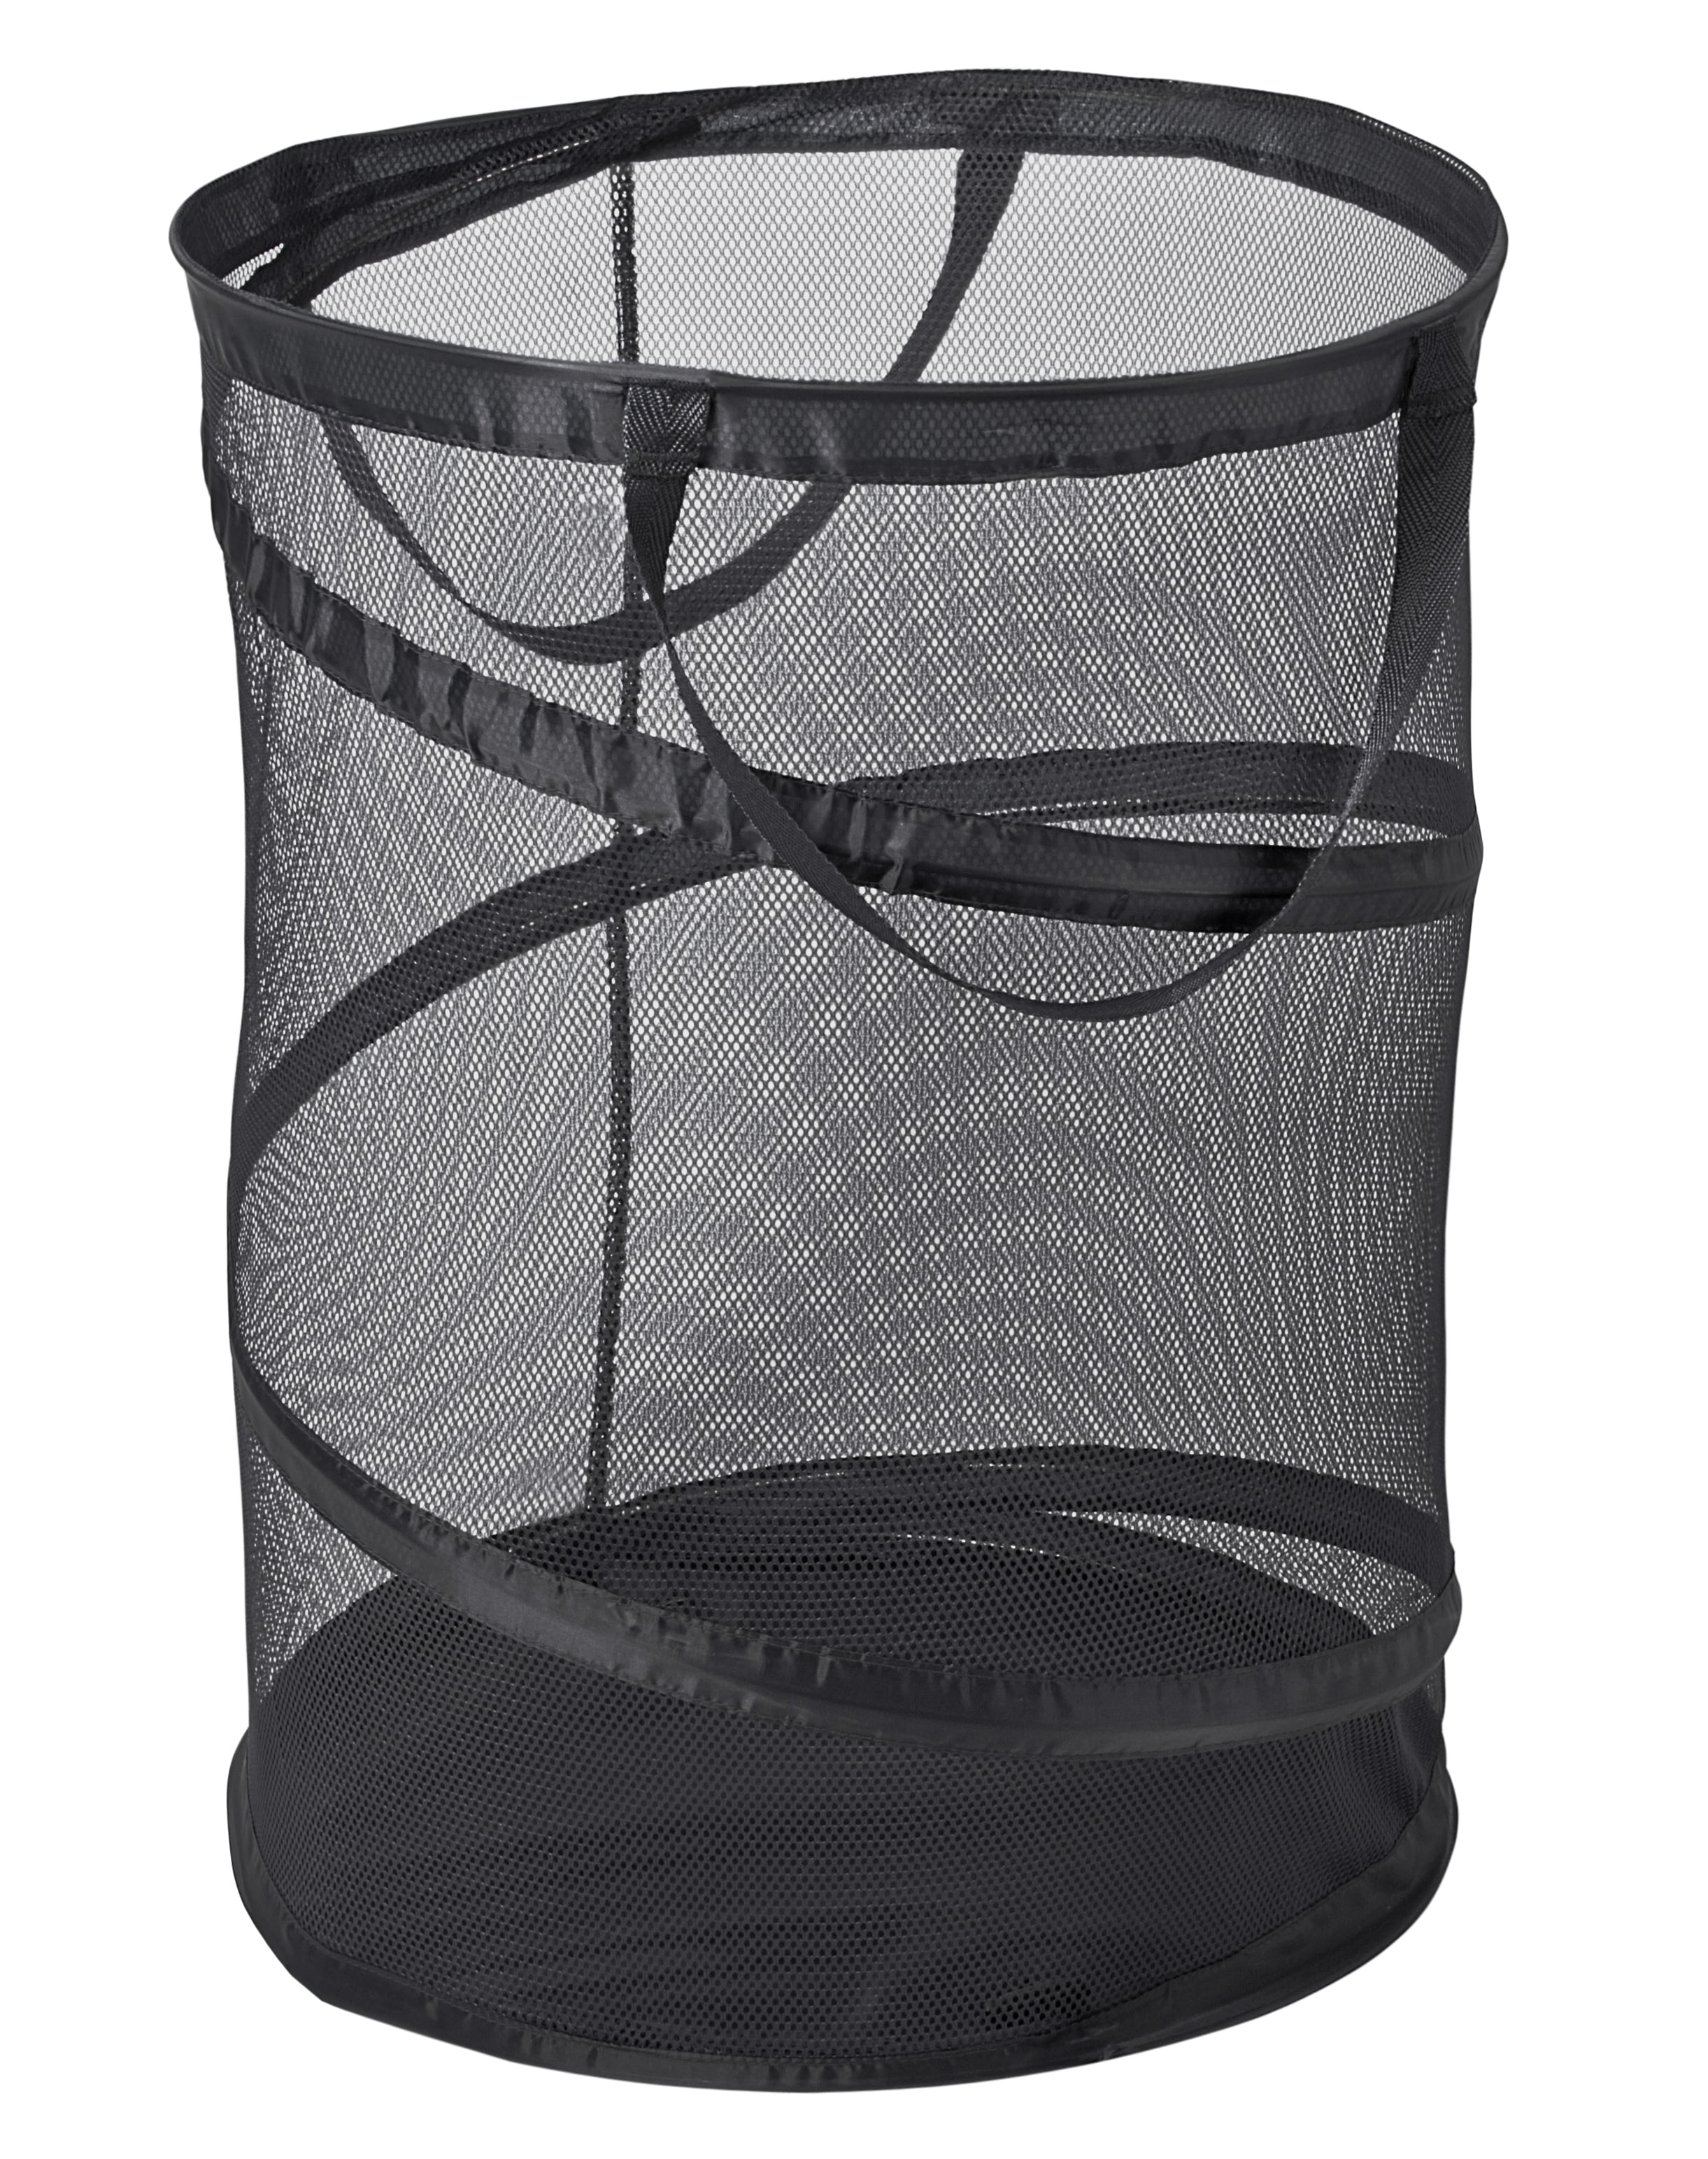 OAVQHLG3B Collapsible Mesh up Laundry Hamper, Foldable Dirty Clothes Basket  ,-Up Storage Bag, Great For Kids Room/College Dorm/Travel 